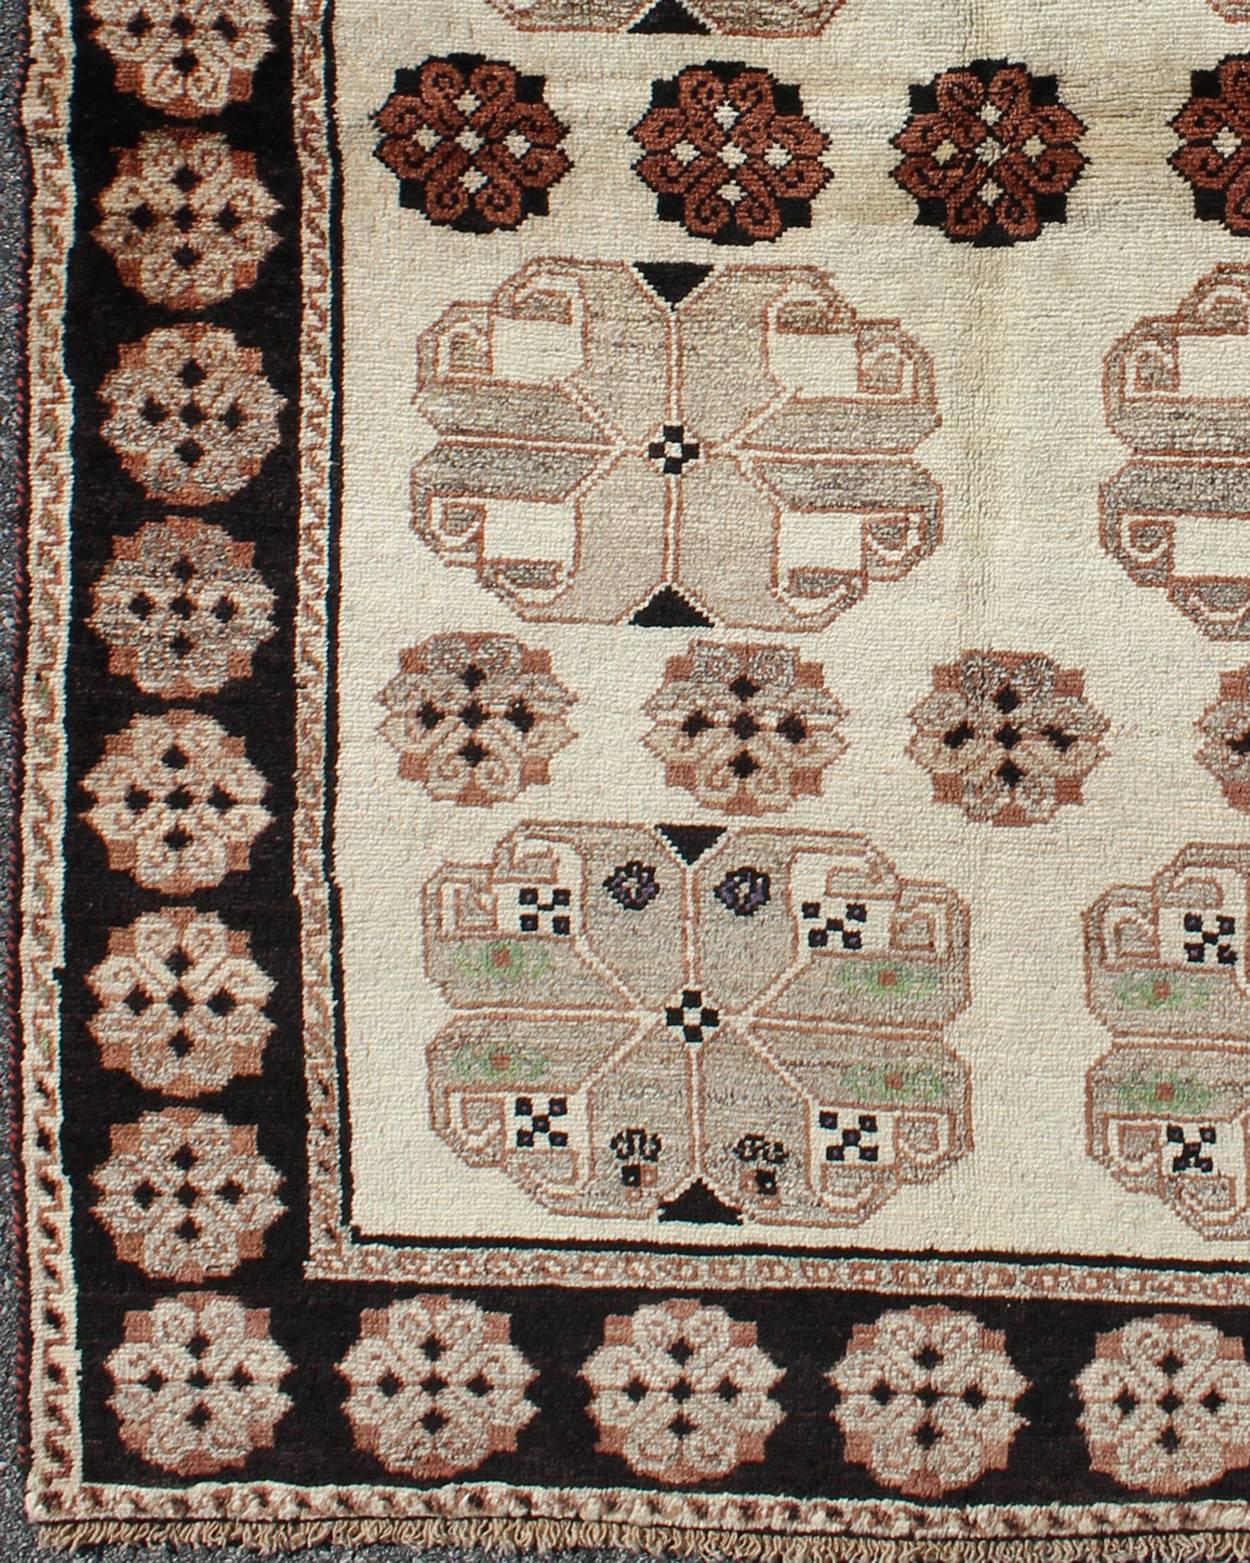 1950s Persian Gabbeh vintage rug with blossom medallions in brown, ivory, onyx, rug h-1205-04, country of origin / type: Iran / Gabbeh, circa 1950

This high-pile mid-20th century vintage Persian Gabbeh carpet consists of repeating blossom